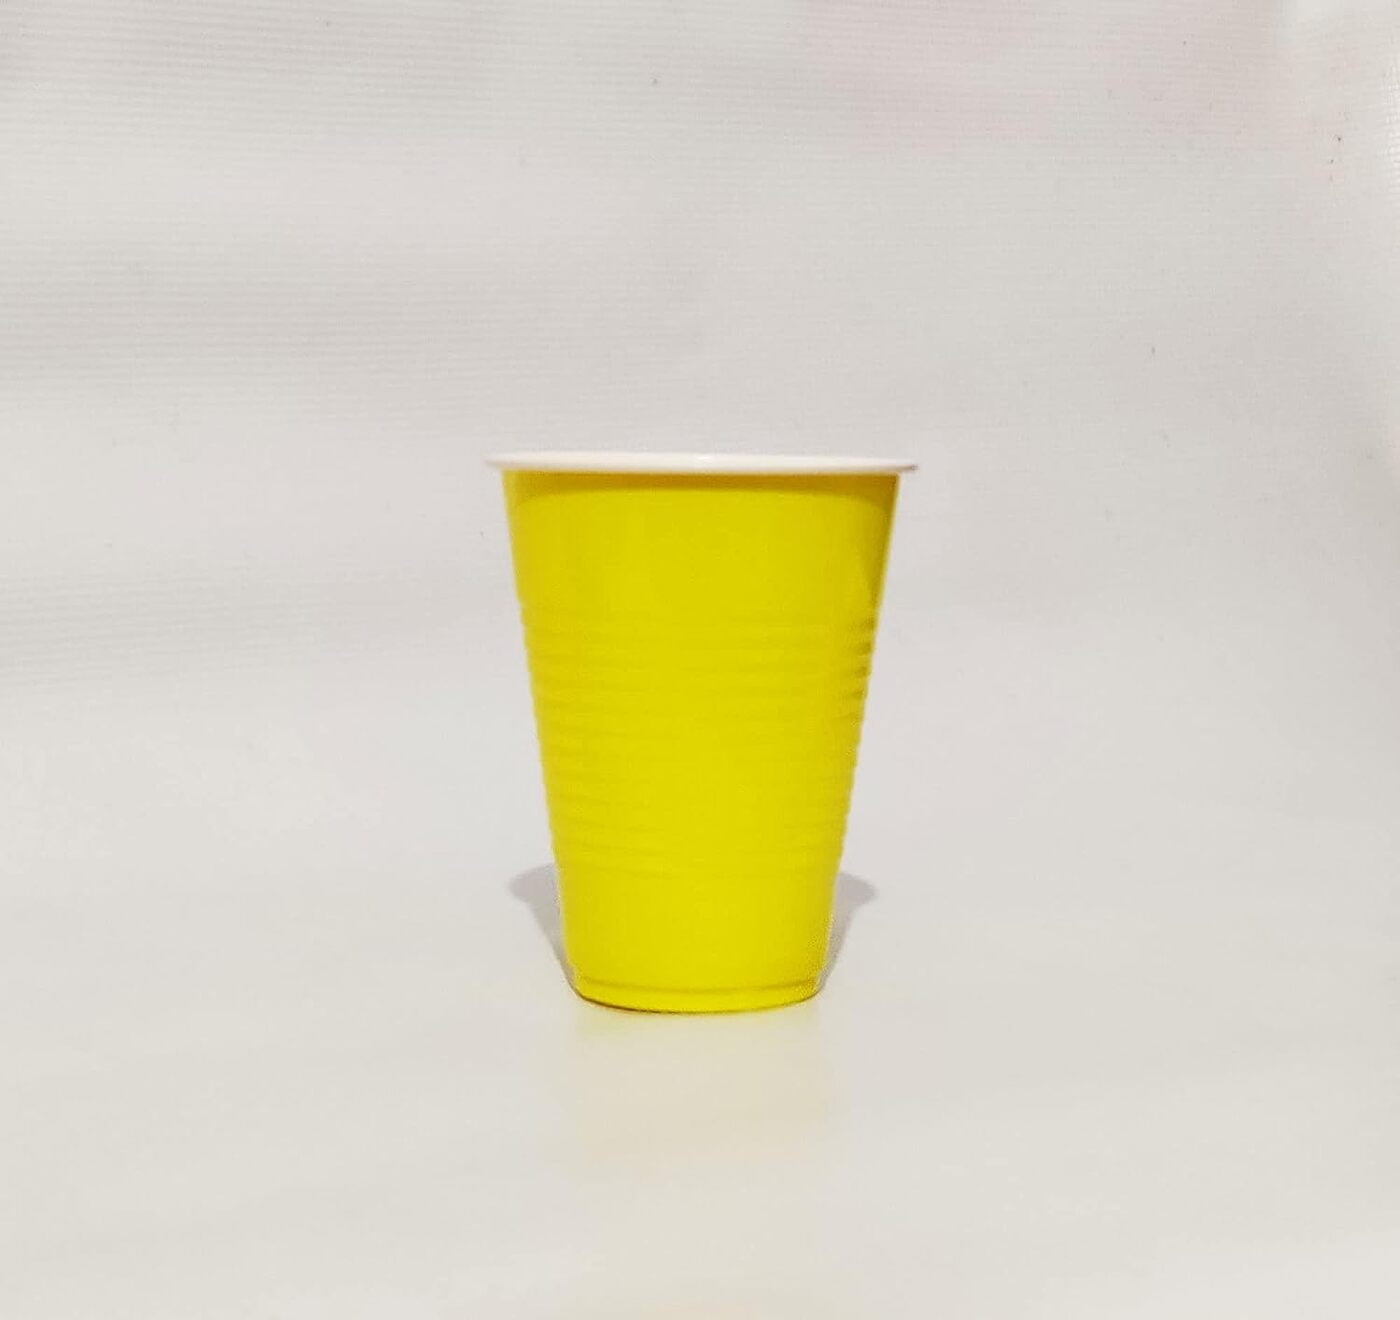 Yellow Drinking Cup | Drinking Glass Pack -30pcs 450ml Medium Glasses and 10pcs of 60ml shot Glasses for New Year Bachelor Anniversary Helloween Diwali Christmas Adults| Party Suppliers | Set of 40pcs